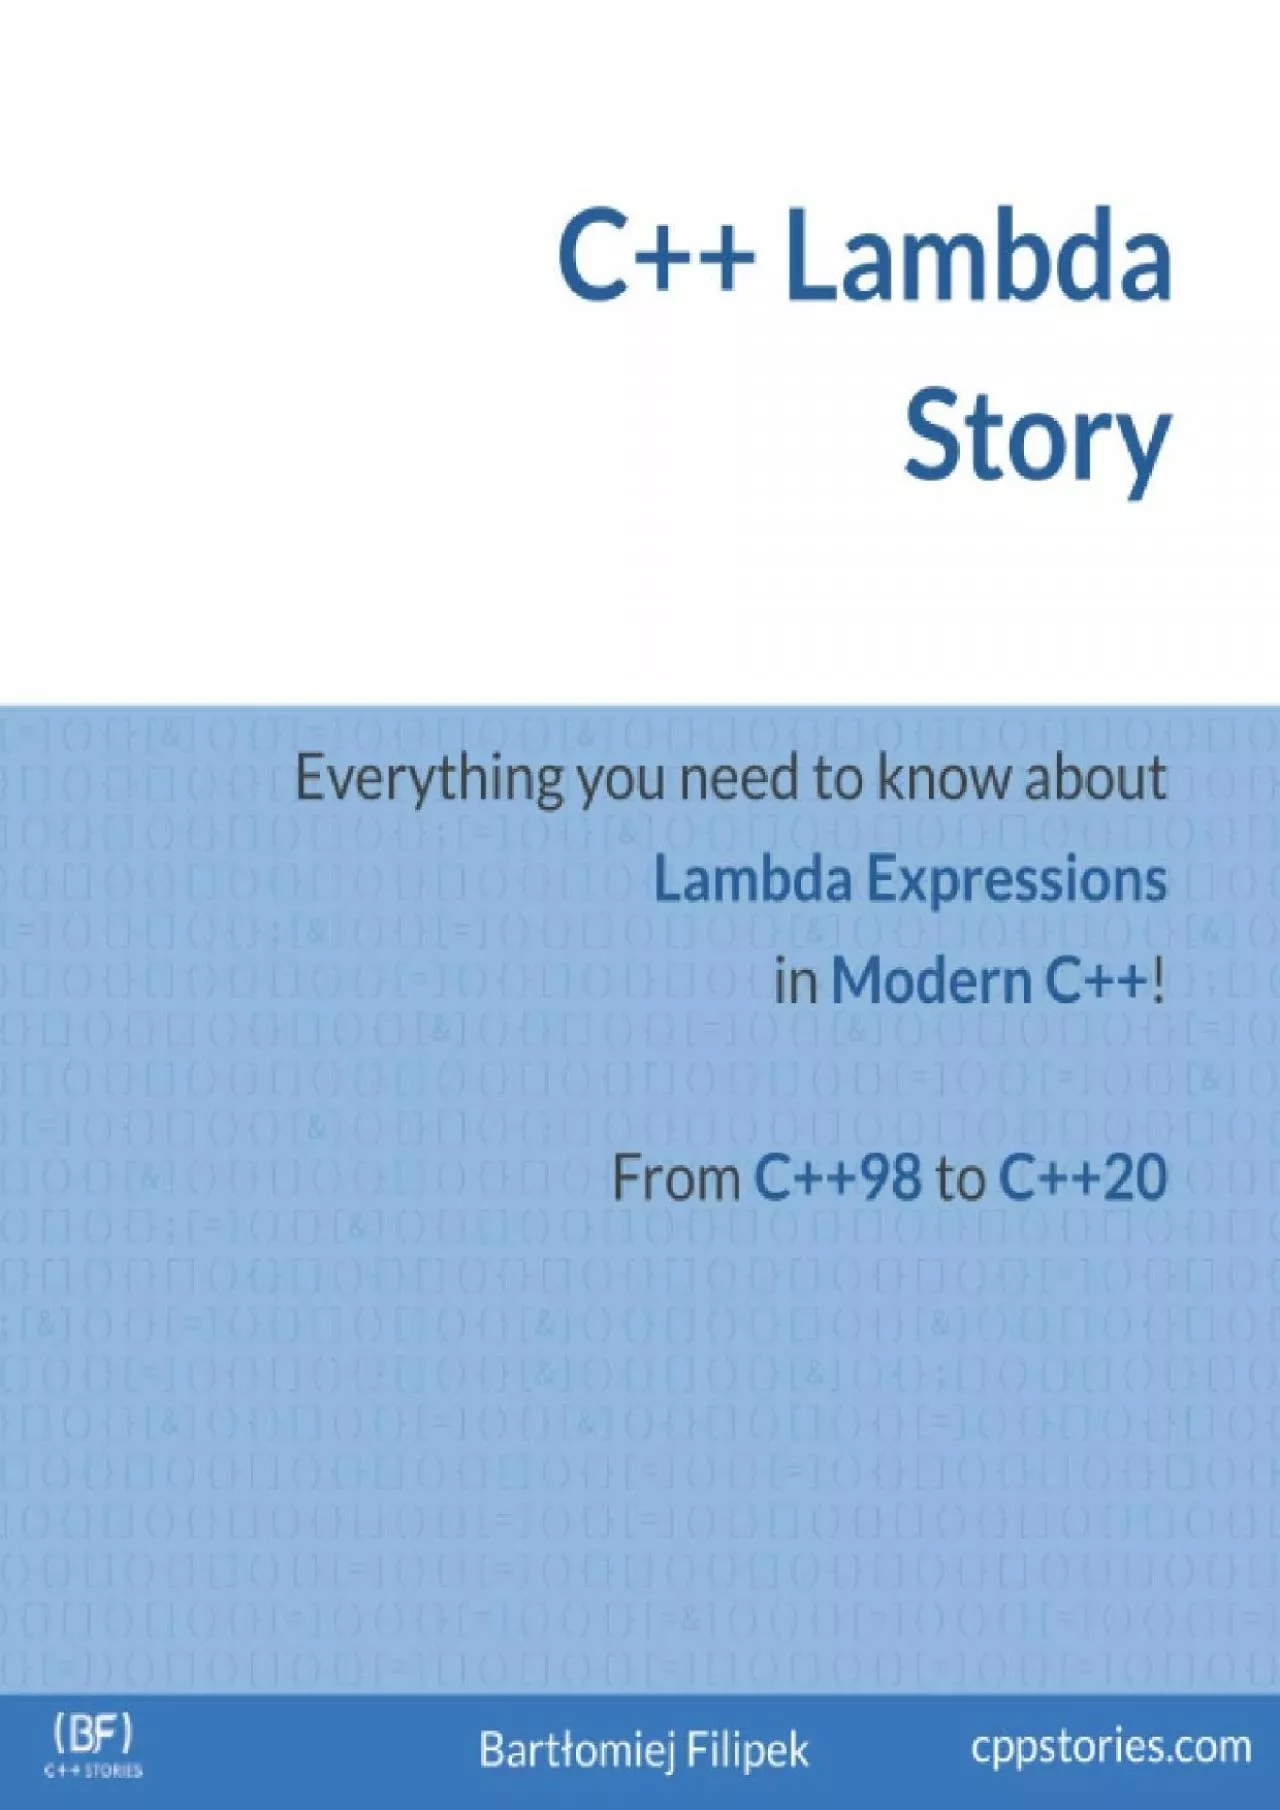 [FREE]-C++ Lambda Story: Everything you need to know about Lambda Expressions in Modern